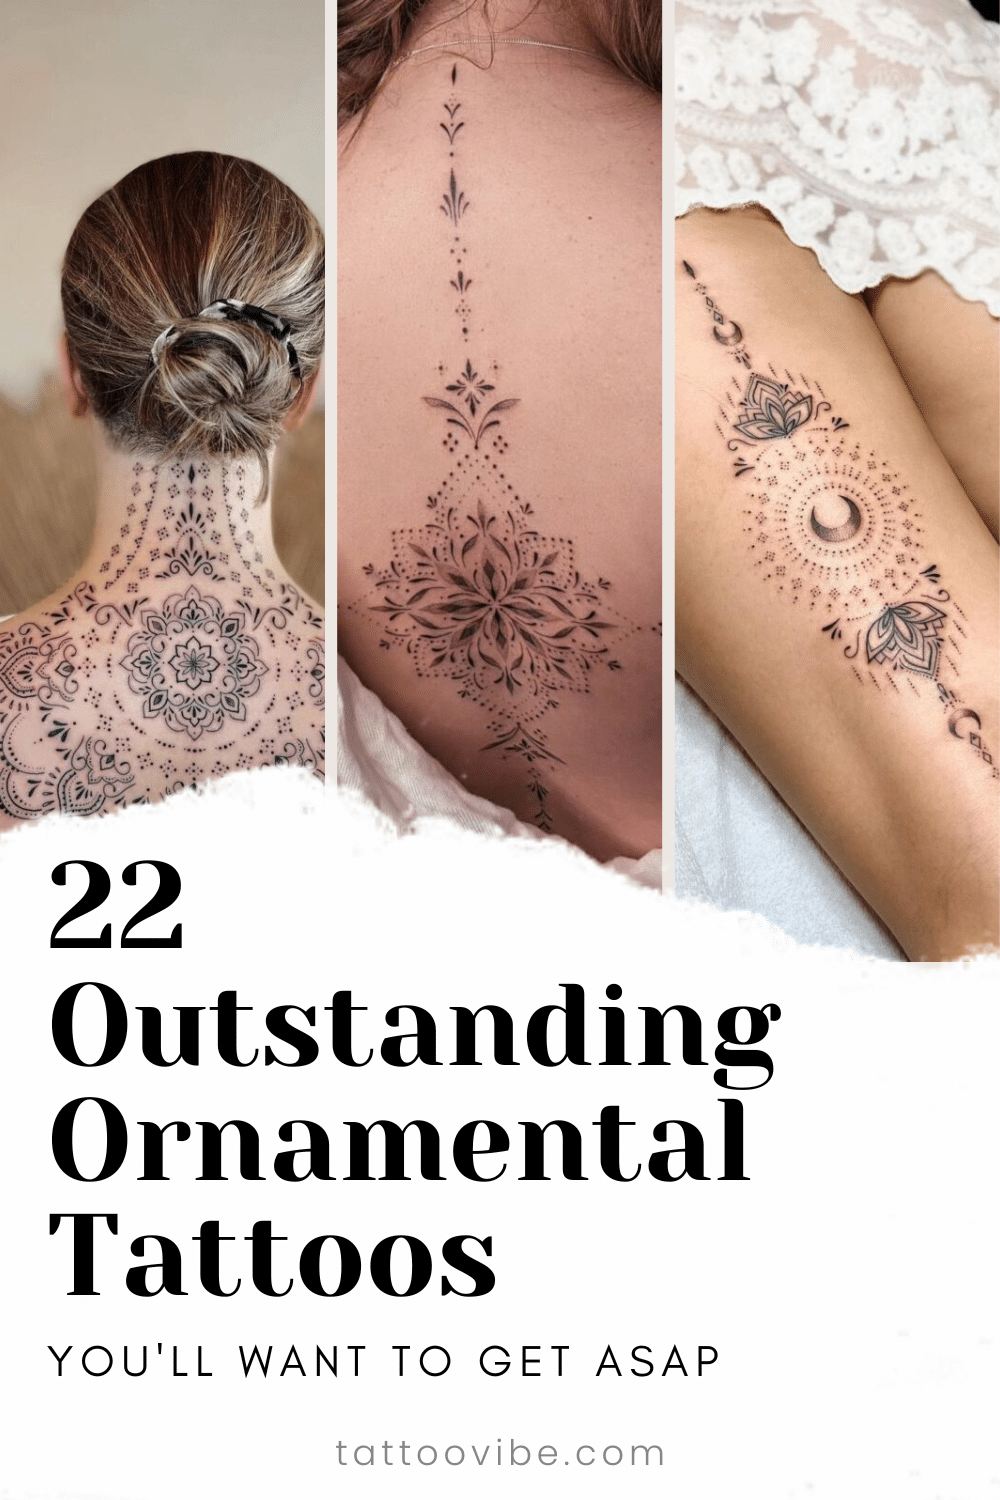 22 Outstanding Ornamental Tattoos You'll Want To Get ASAP